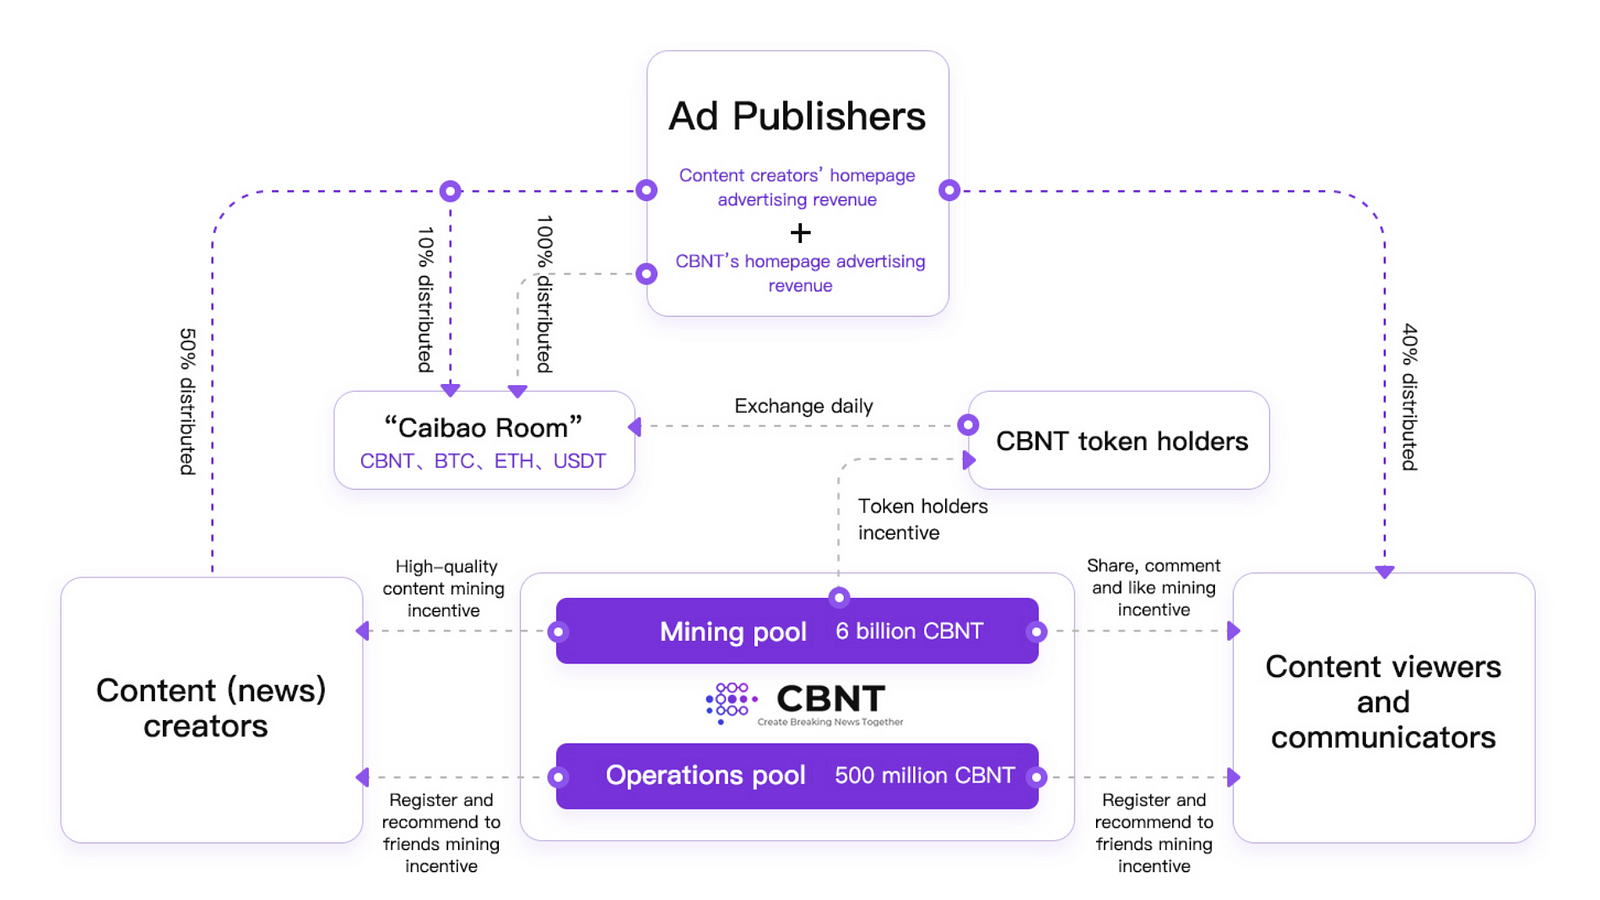 The image for the image is cbnt bounty